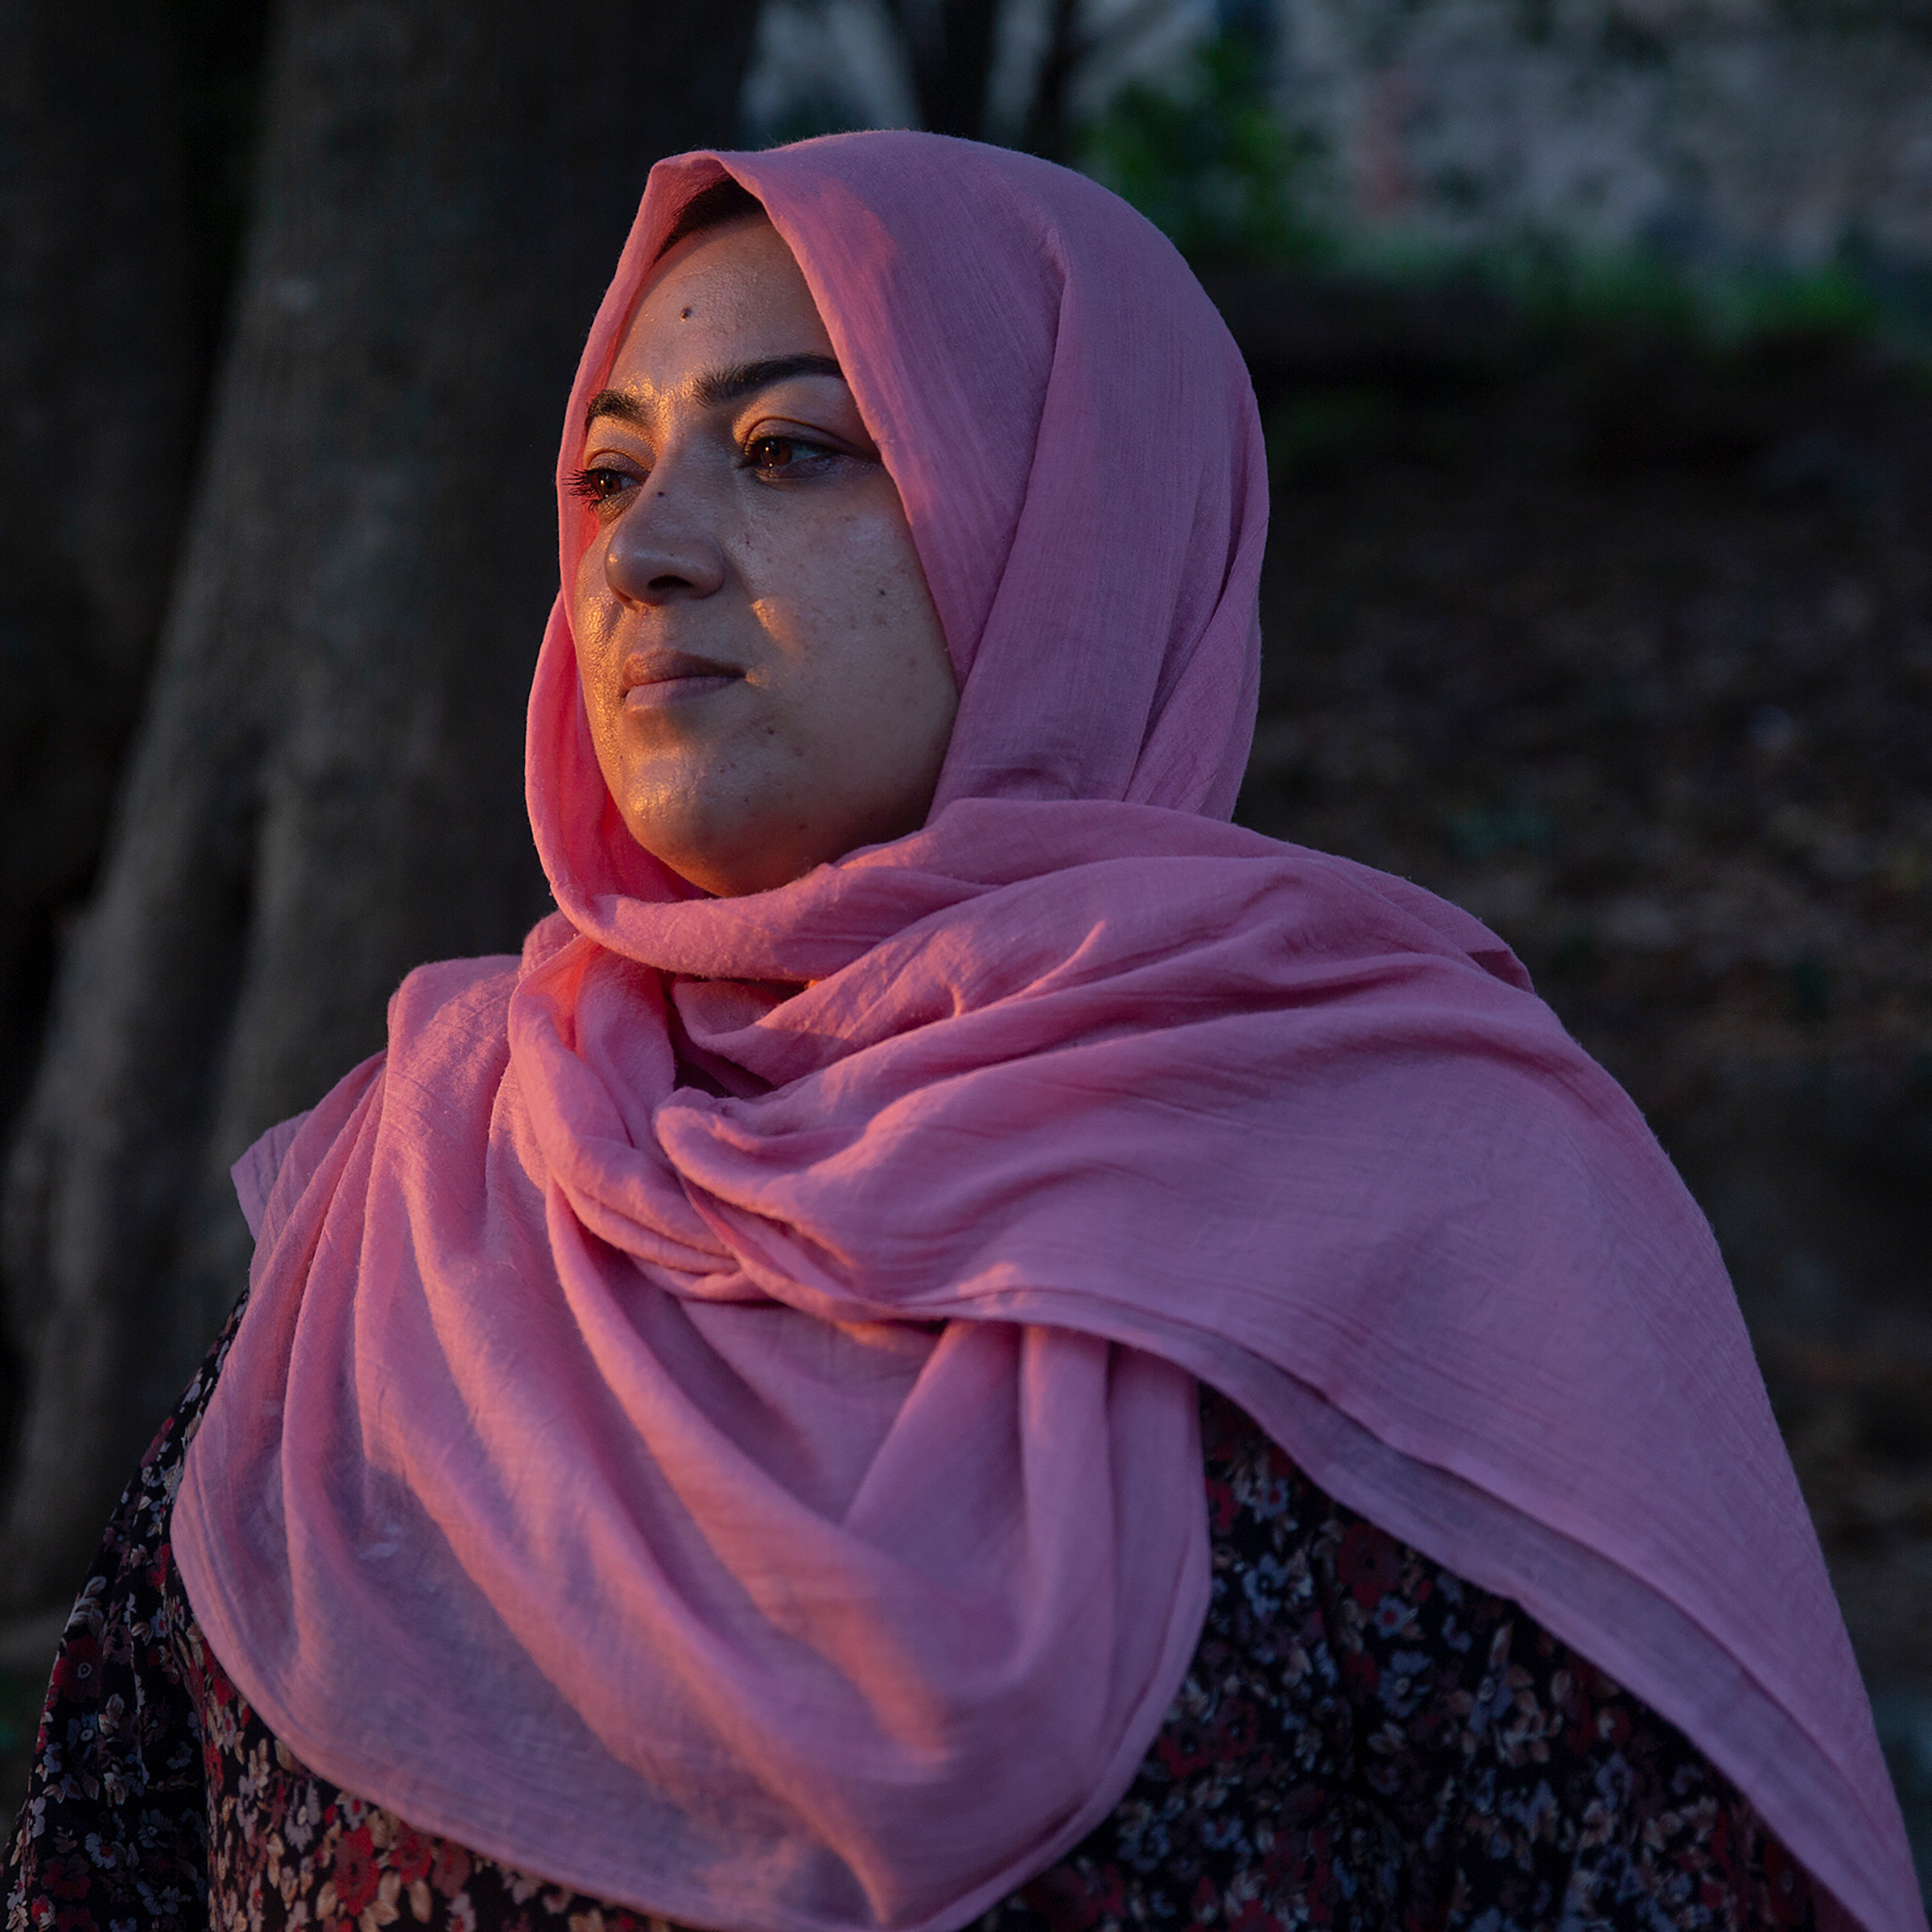 Batool Haidari gazes out at the sunset by her house in Rome